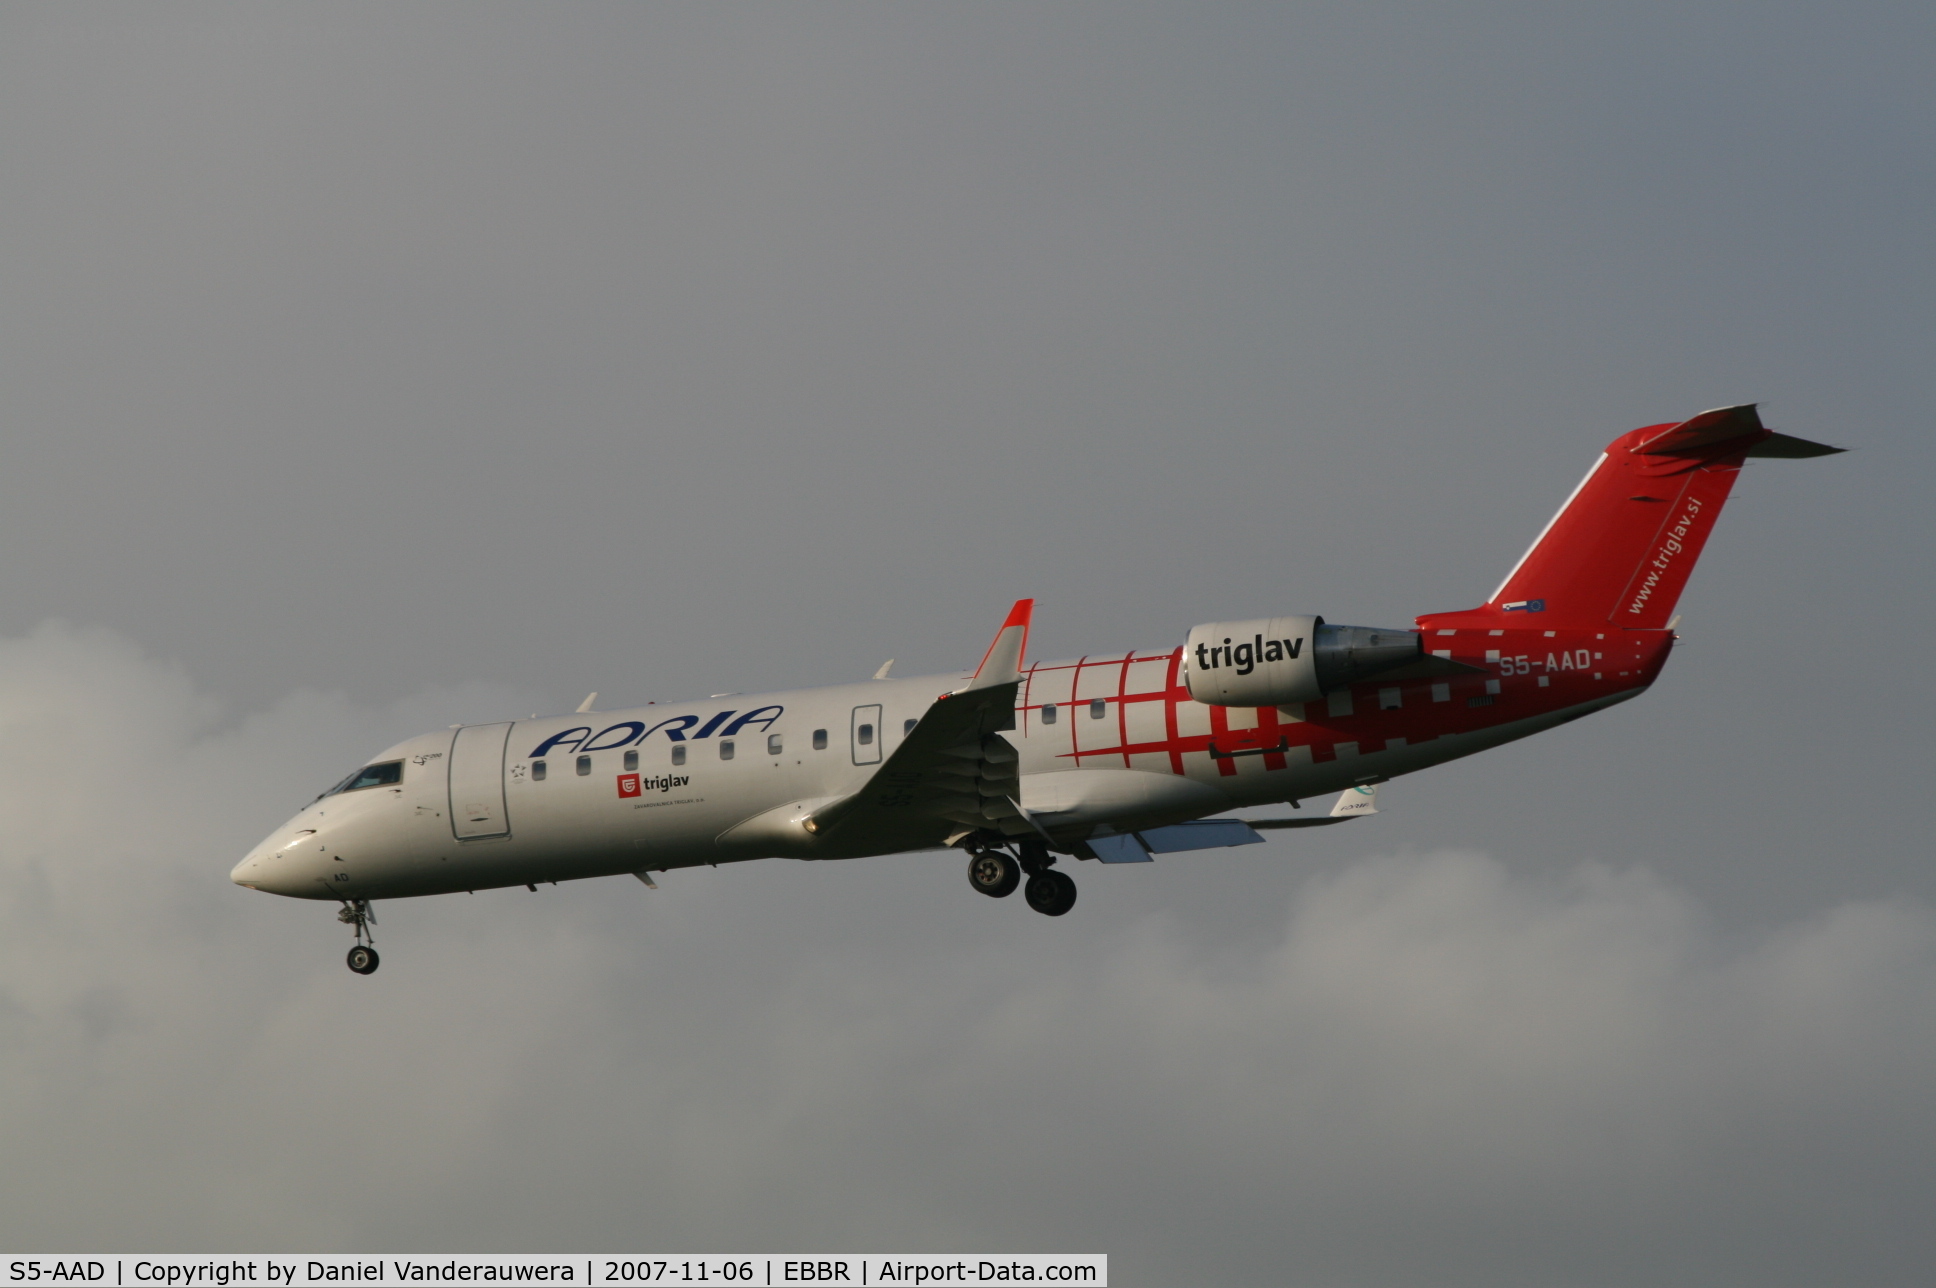 S5-AAD, 1997 Canadair CRJ-200LR (CL-600-2B19) C/N 7166, flight JP384 is descending to rwy 25L - end of the day